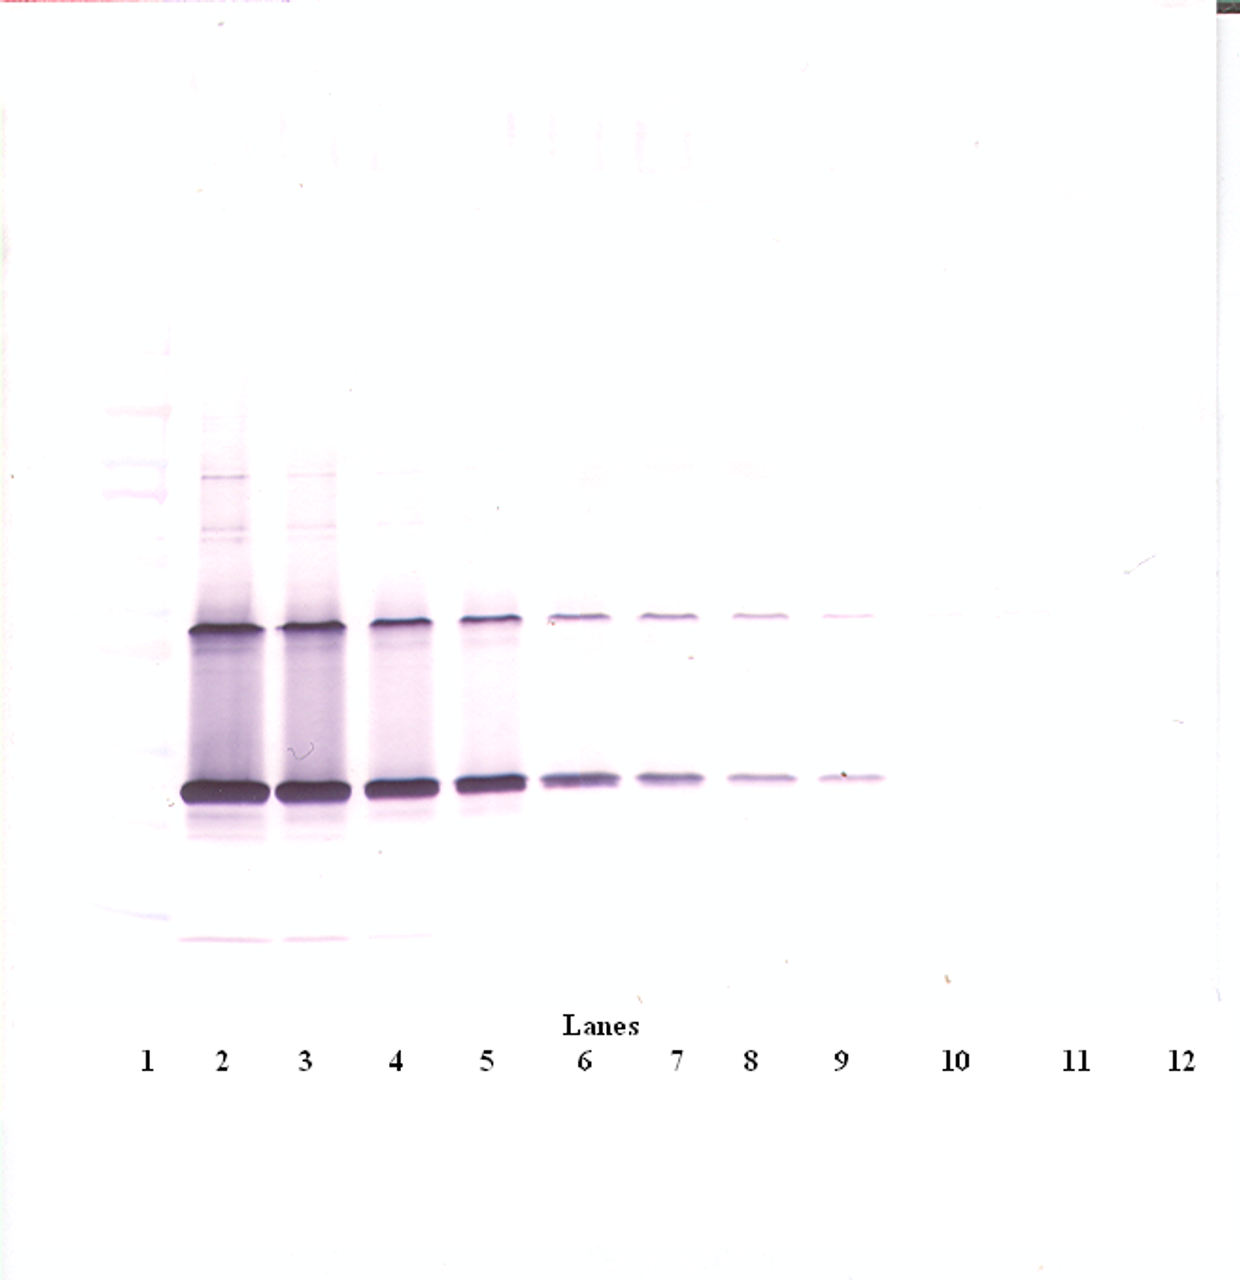 To detect hCNTF by Western Blot analysis this antibody can be used at a concentration of 0.1-0.2 ug/ml. Used in conjunction with compatible secondary reagents the detection limit for recombinant hCNTF is 1.5-3.0 ng/lane, under either reducing or non-reducing conditions.